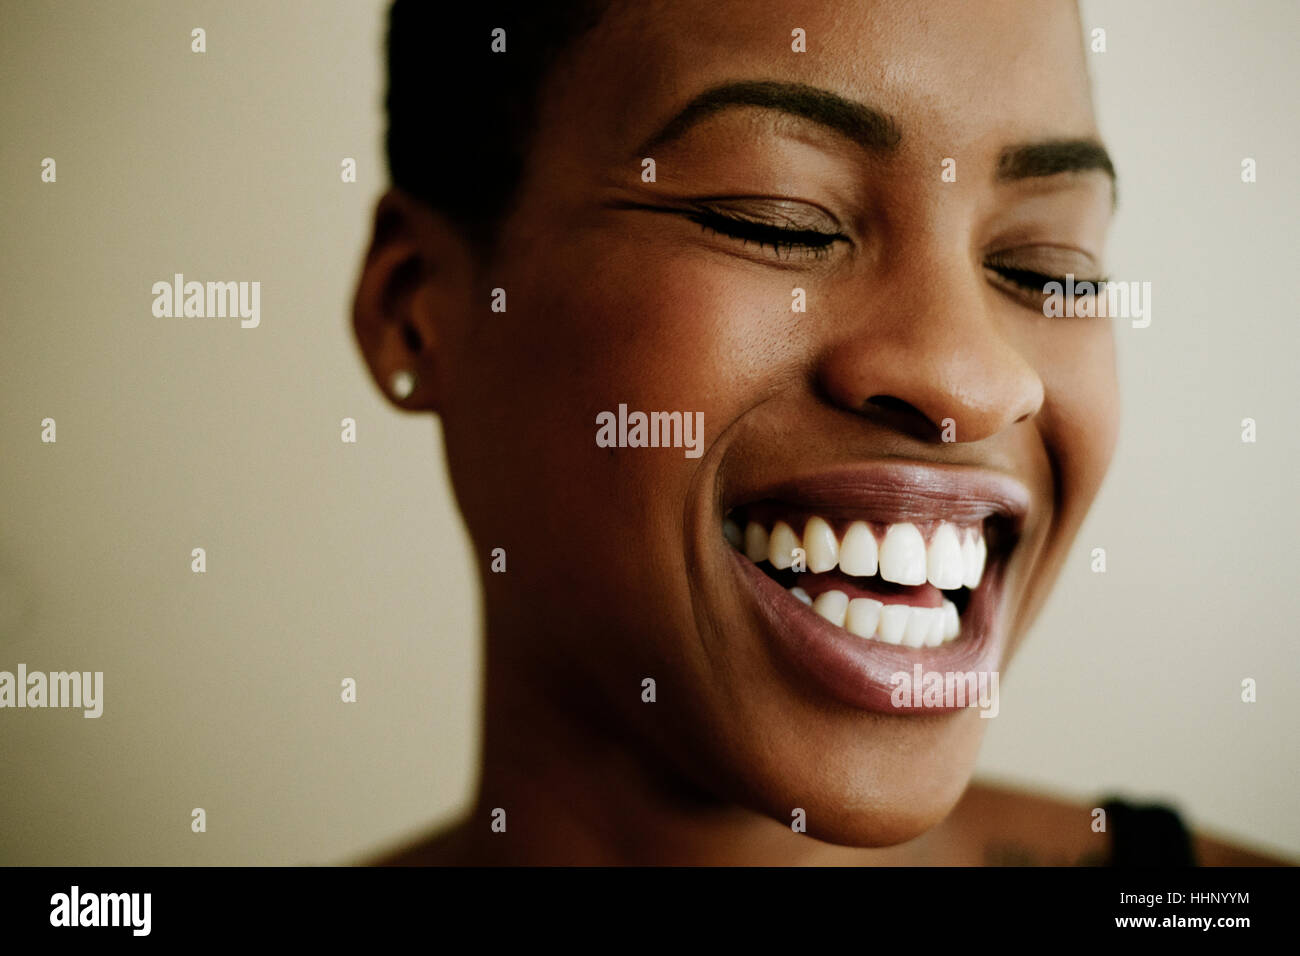 Portrait of face of laughing Black woman Stock Photo